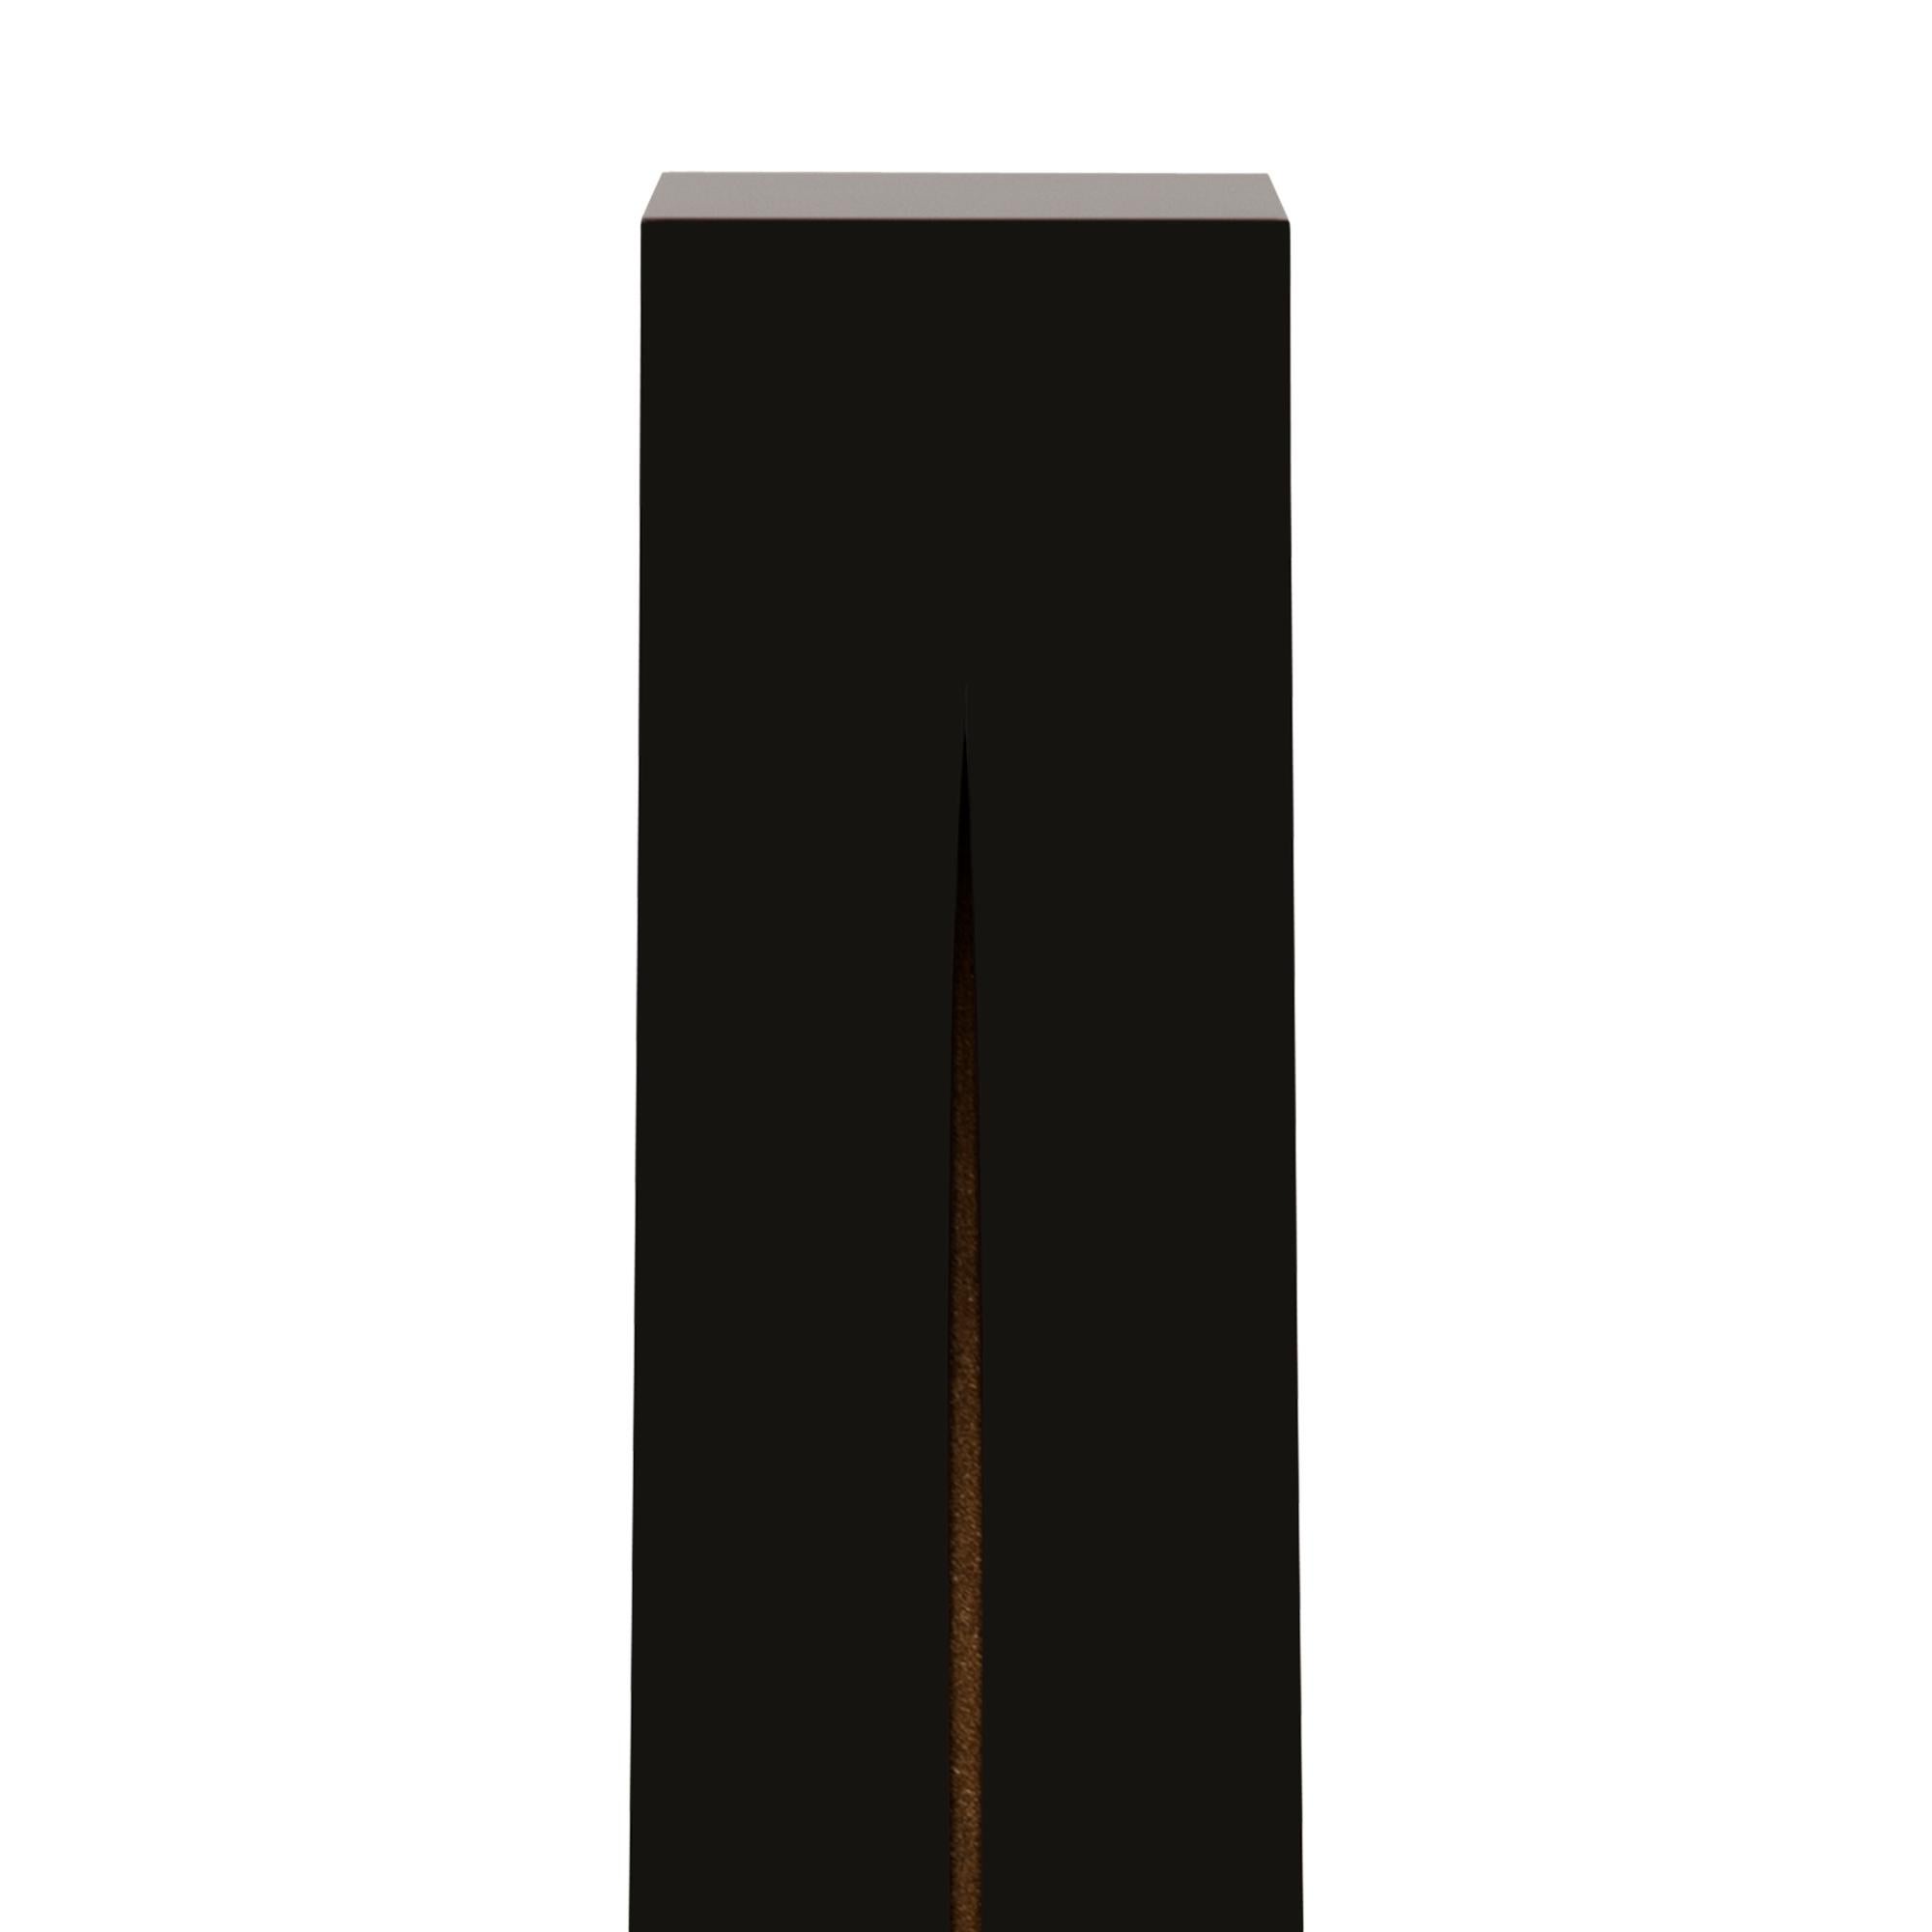 Column or pedestal black pillar in solid hand carved wood
in black lacquered finish. With a silk cut carved into the
surface on one front, silk in sanded gold finish.
Column on wooden plinth.
Also available in white lacquered finish with silk in